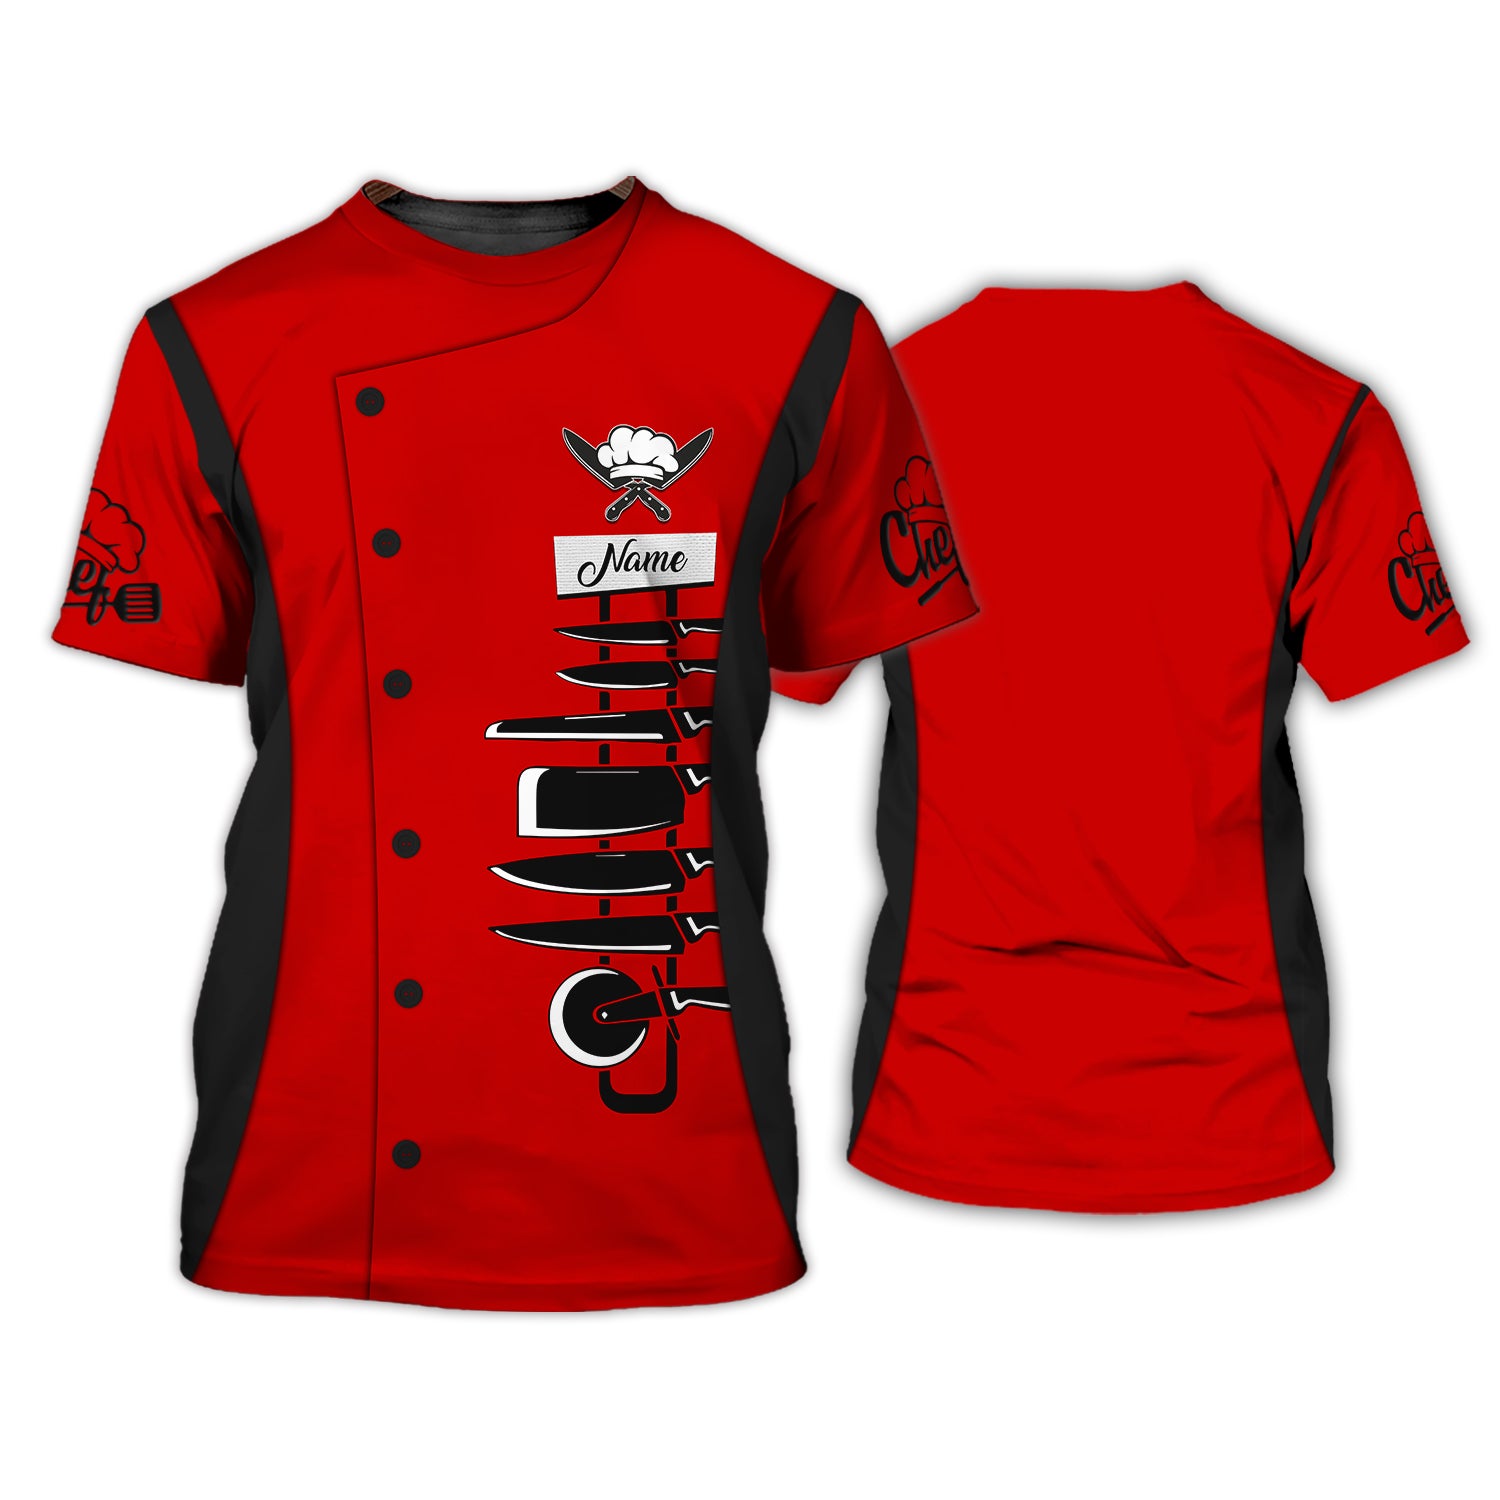 Cook Shirt Chef Personalized Name 3D Tshirt Kitchen Red & Black Shirt